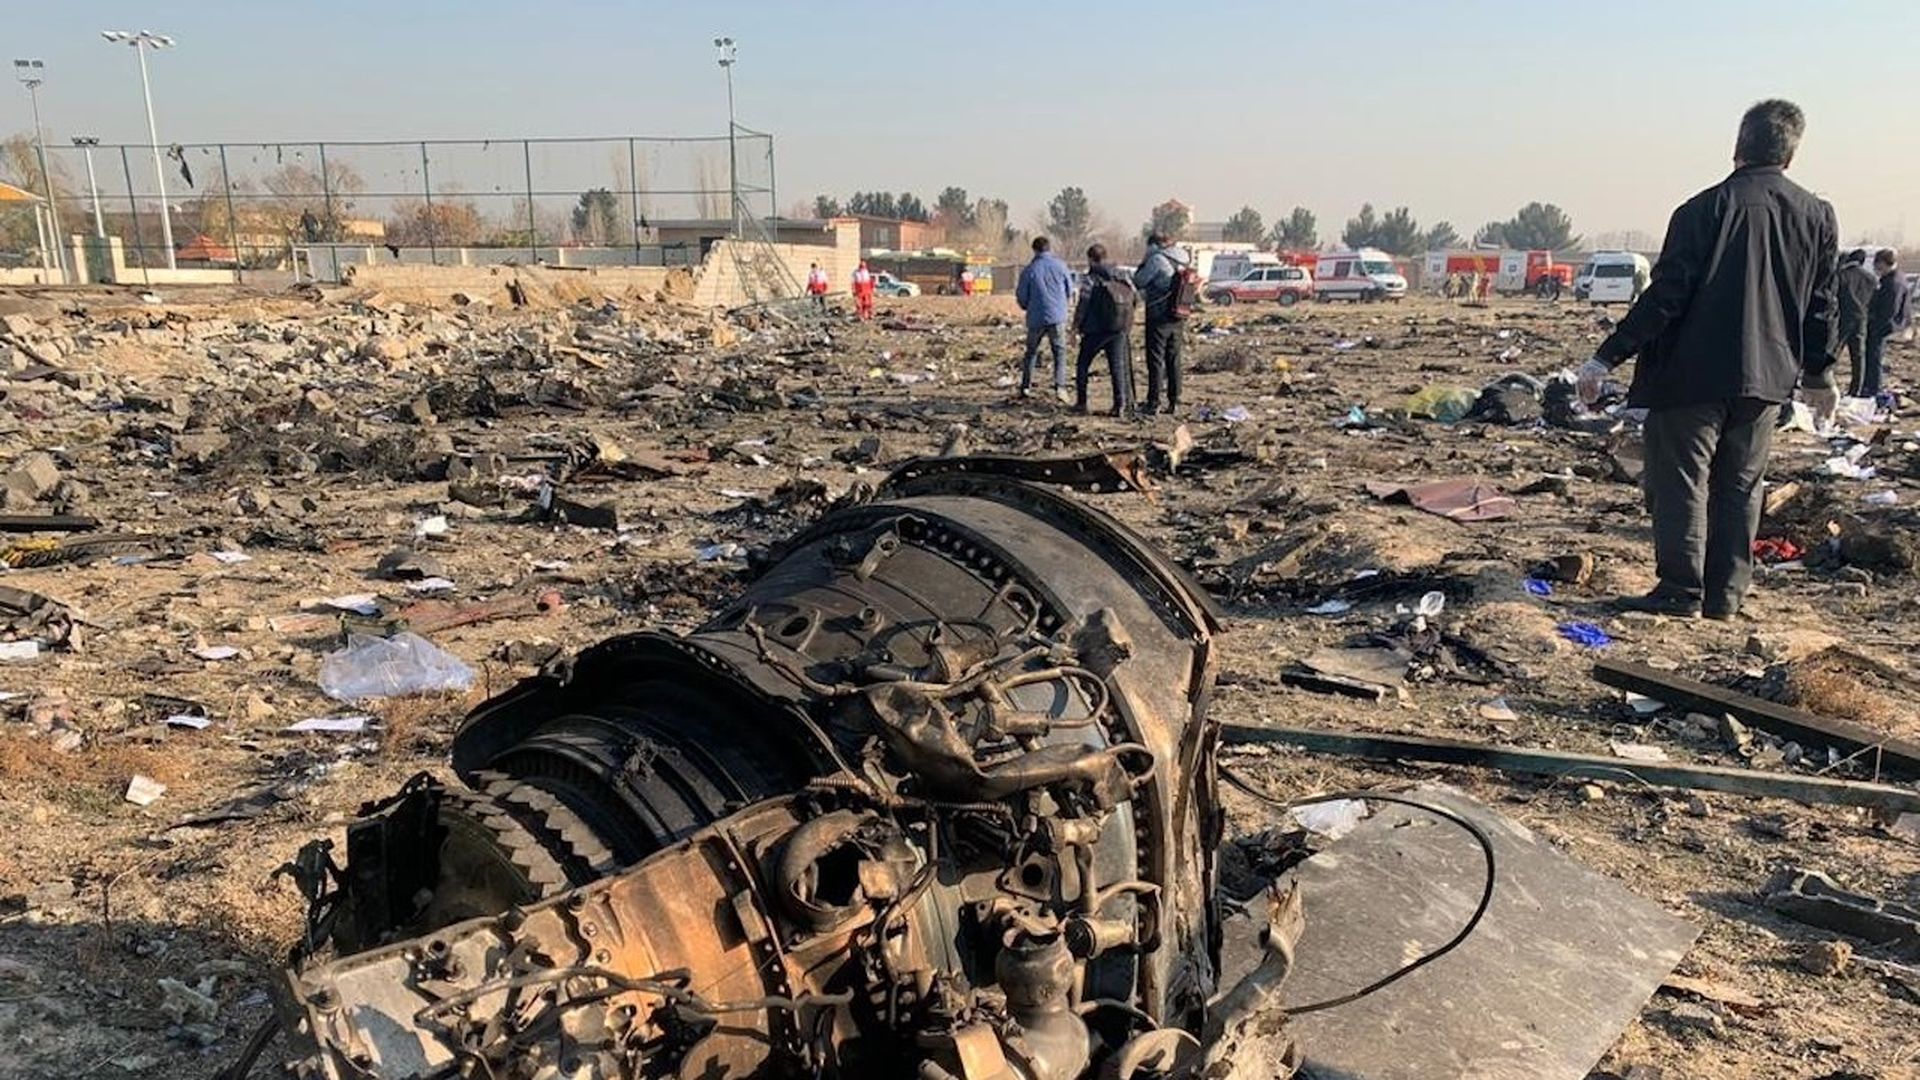  Search and rescue works are conducted at site after a Boeing 737 plane belonging to a Ukrainian airline crashed near Imam Khomeini Airport in Iran.